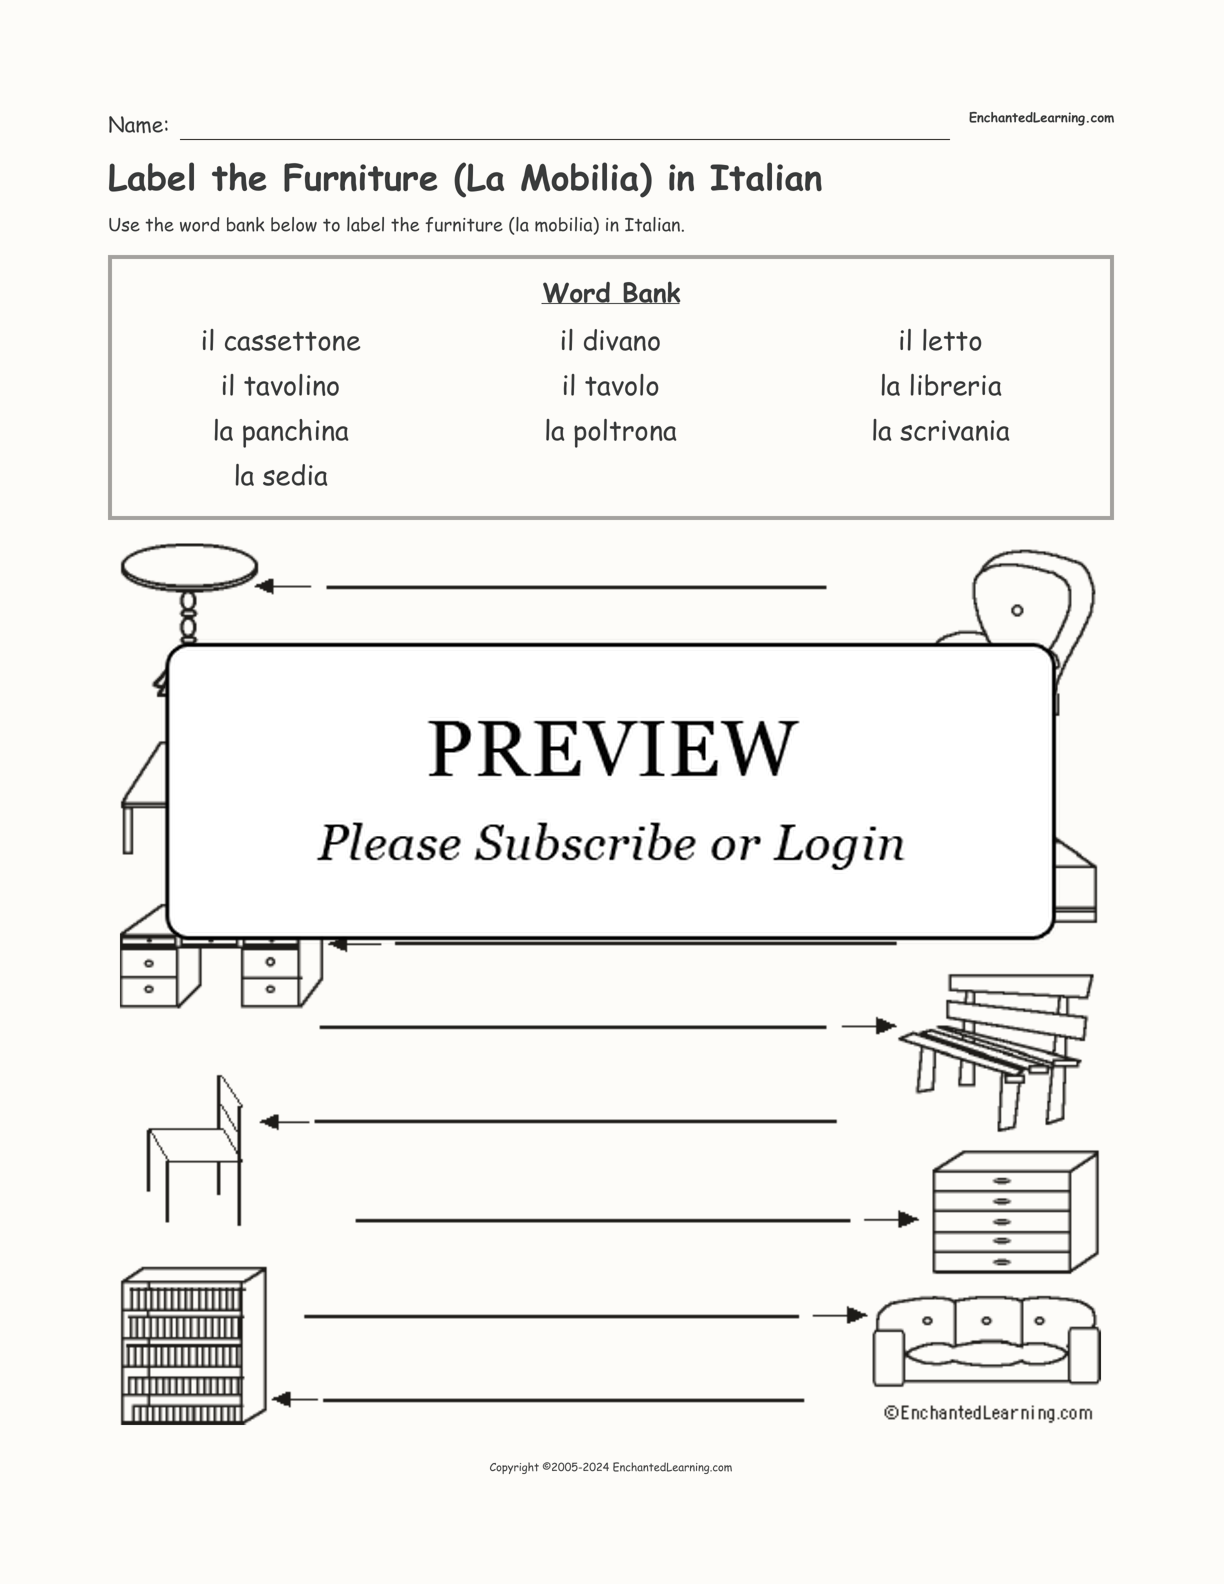 Label the Furniture (La Mobilia) in Italian interactive worksheet page 1